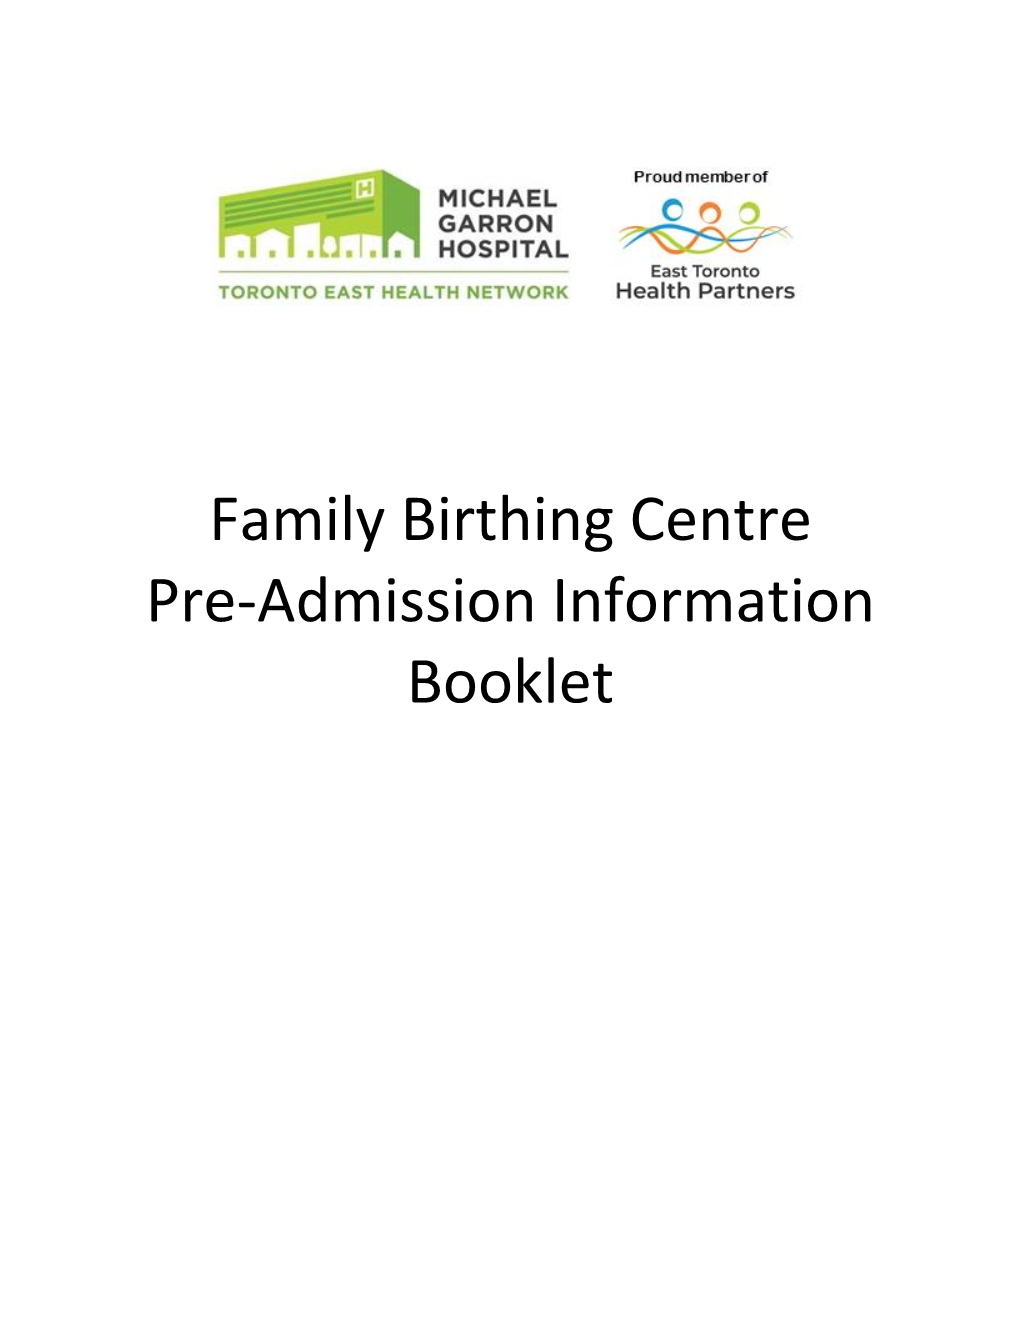 Family Birthing Centre Pre-Admission Information Booklet